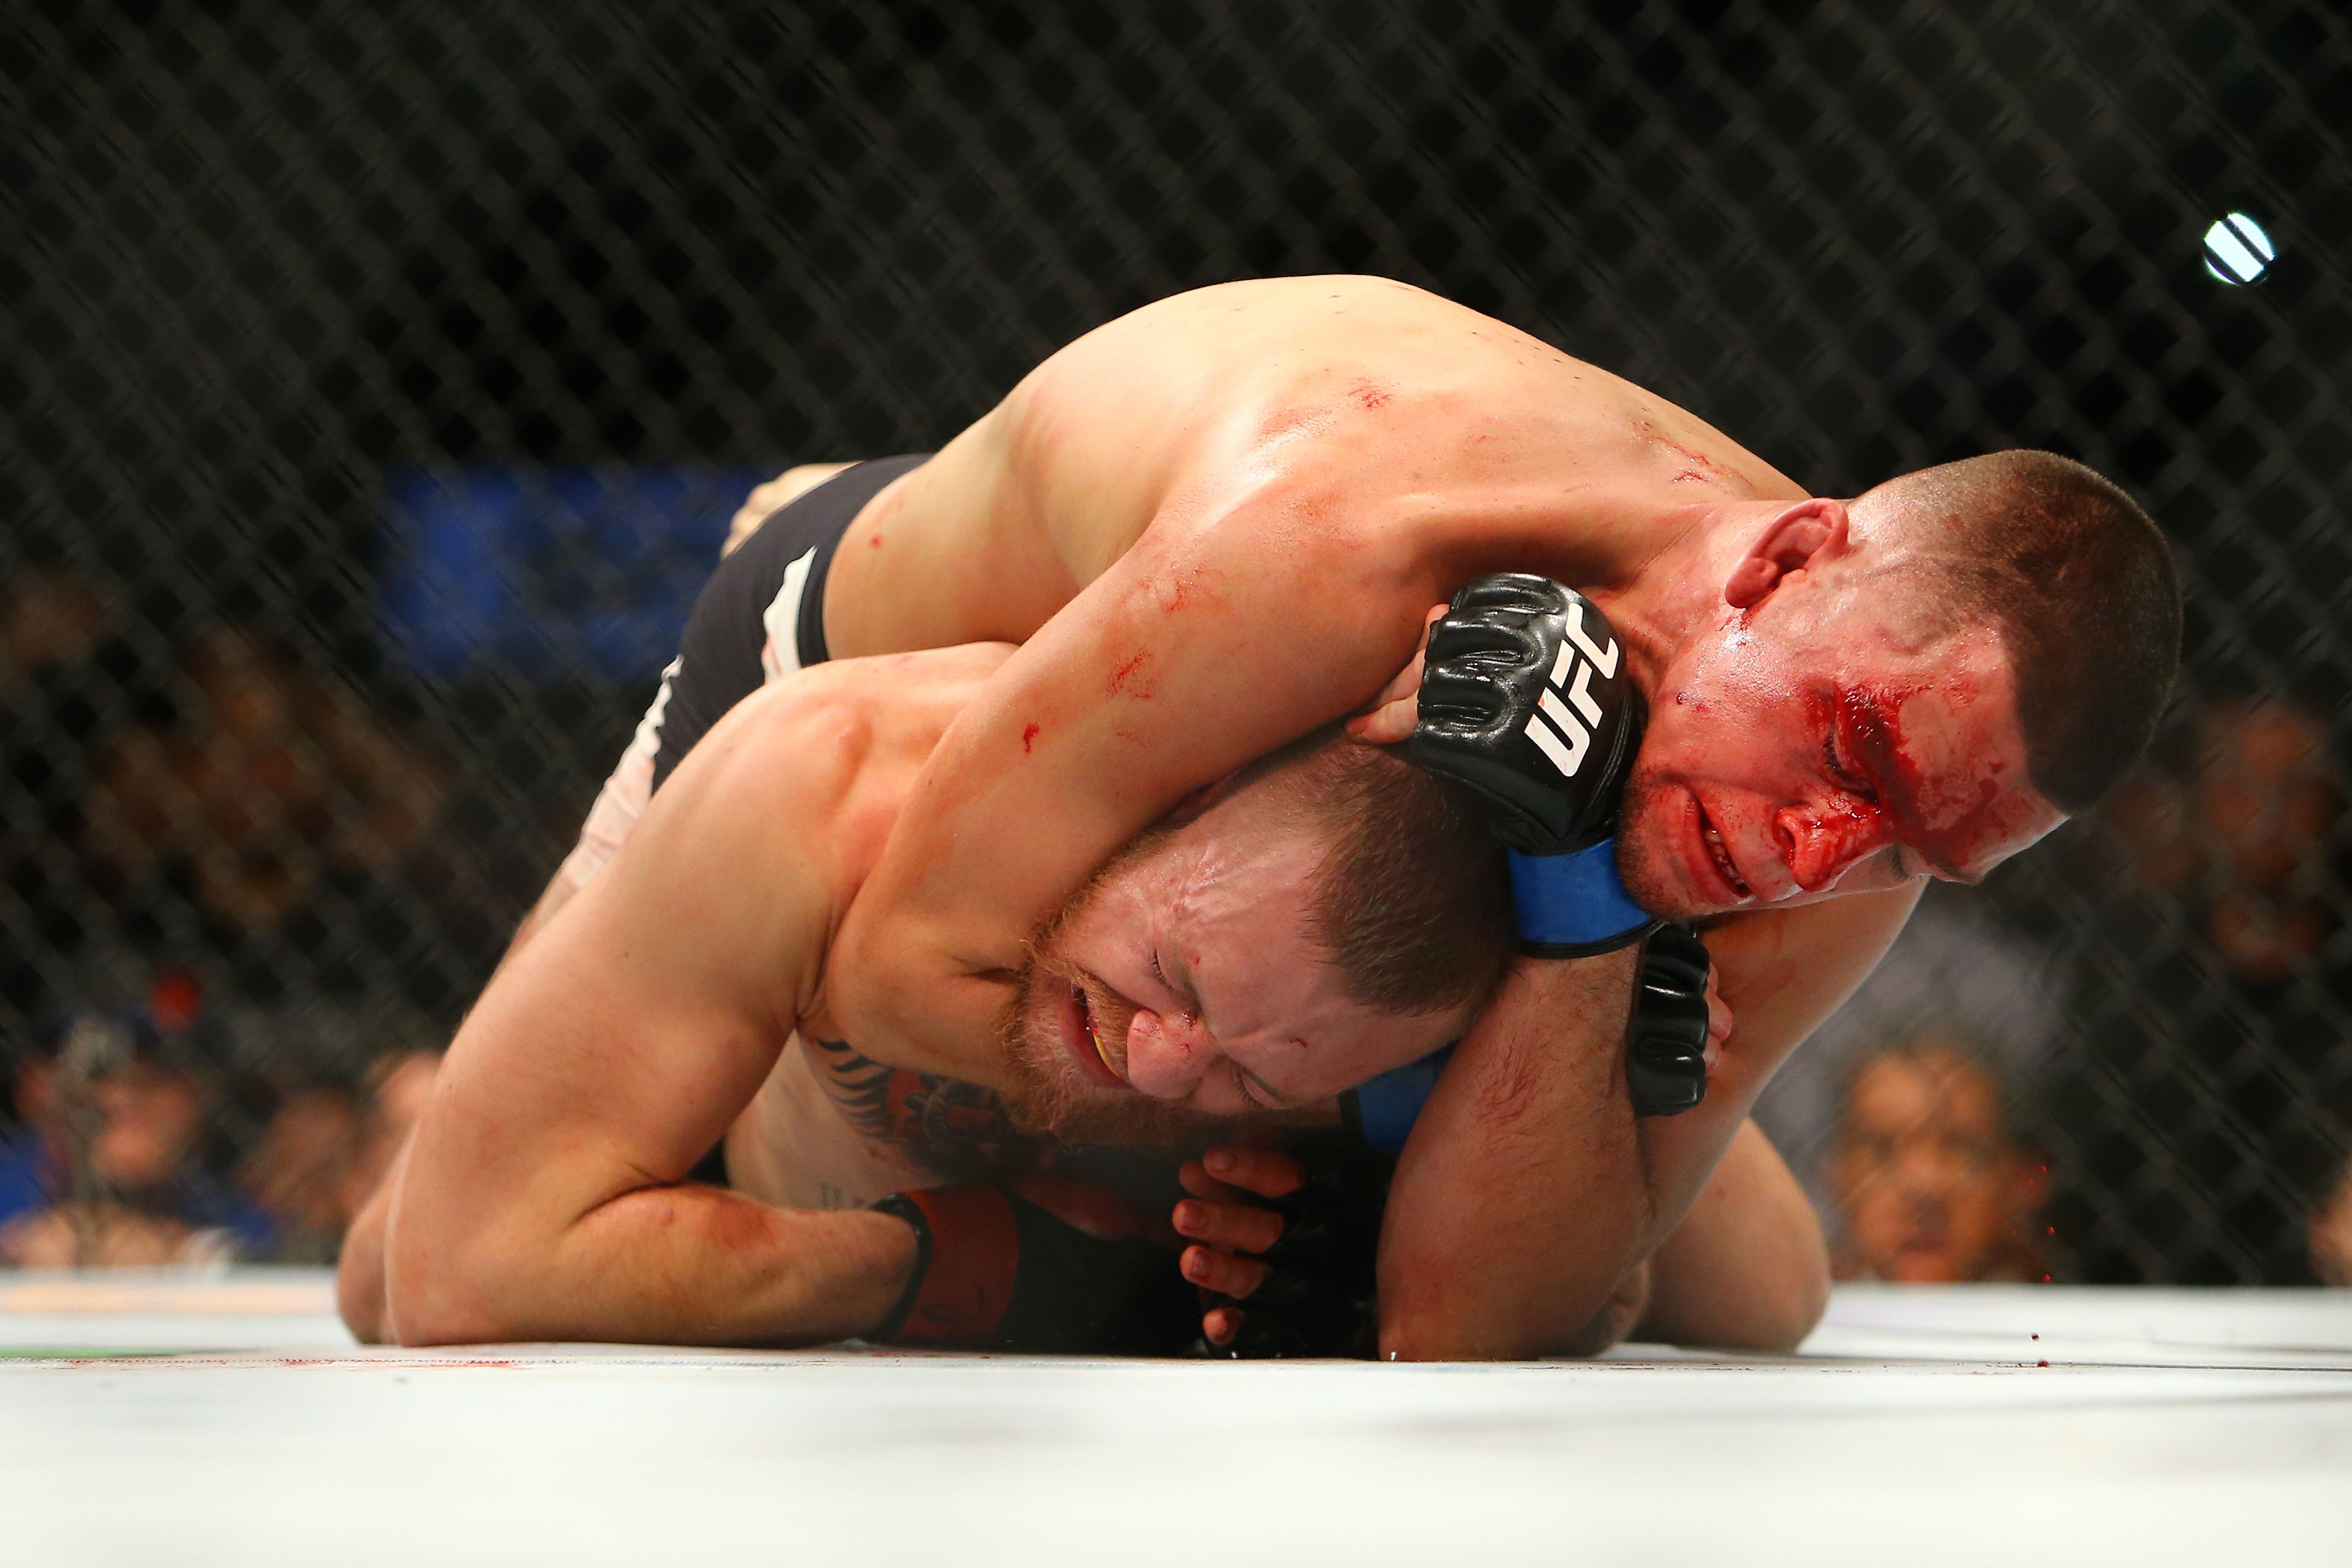 Nate Diaz has twice fought Conor McGregor in their epic rivalry